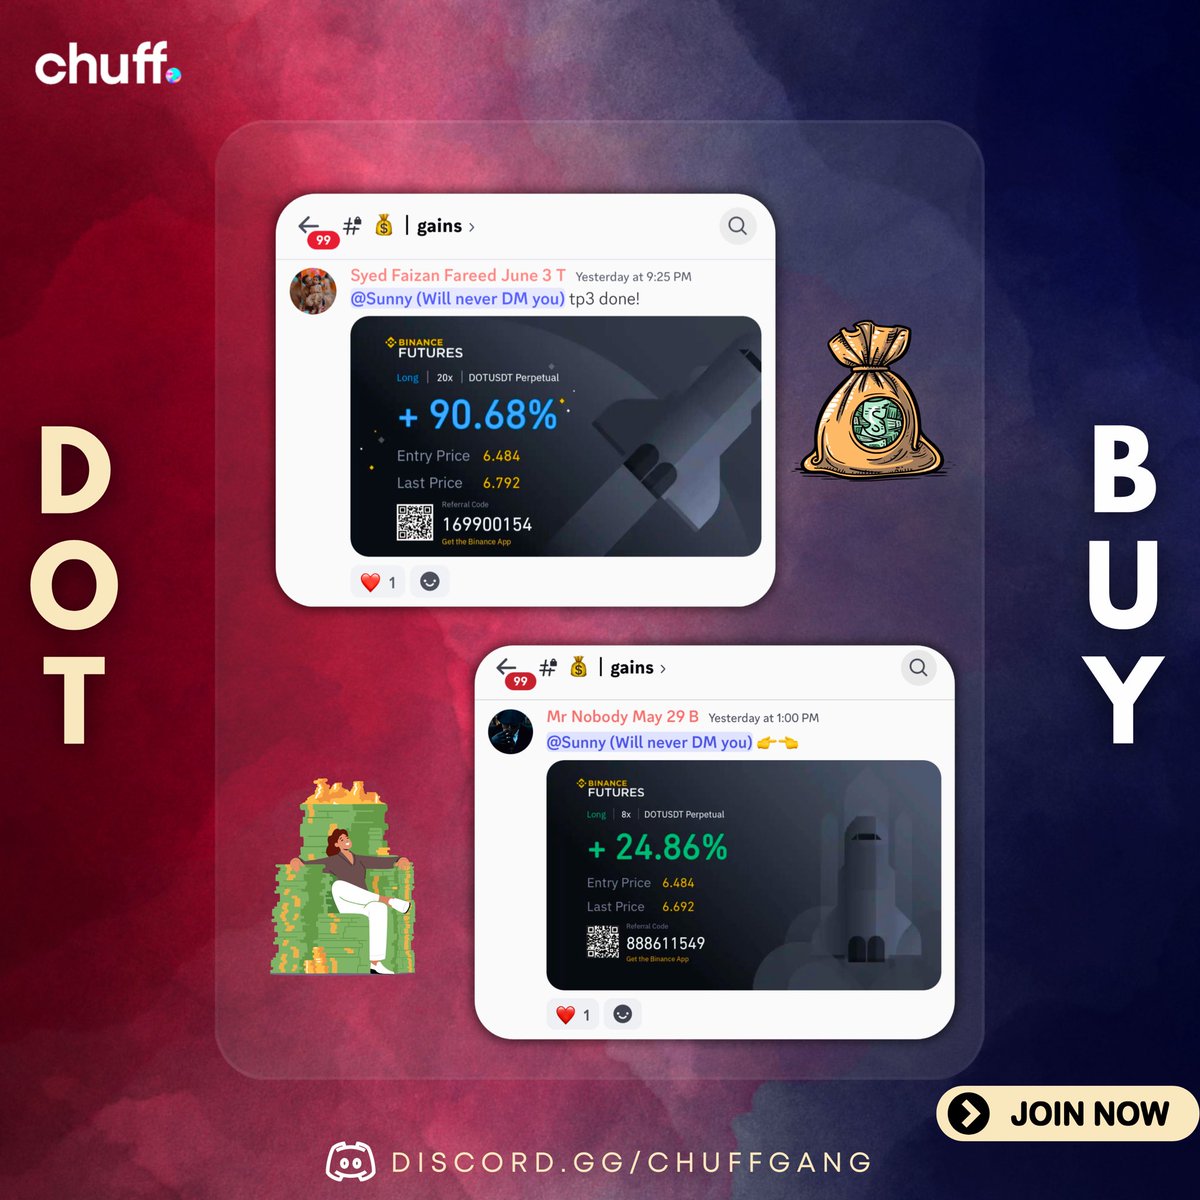 New Day. New Money 💵💵🤑 

Premium Entries Closed Now. Will Reopen by 25th May

🔗 Free group link in our bio.

.
.
.
.
#thechuffgang #chuff #btc #marketupdates #crypto #cryptocurrency #cryptomemes
#cryptomarket #investors #stockmarket #trending